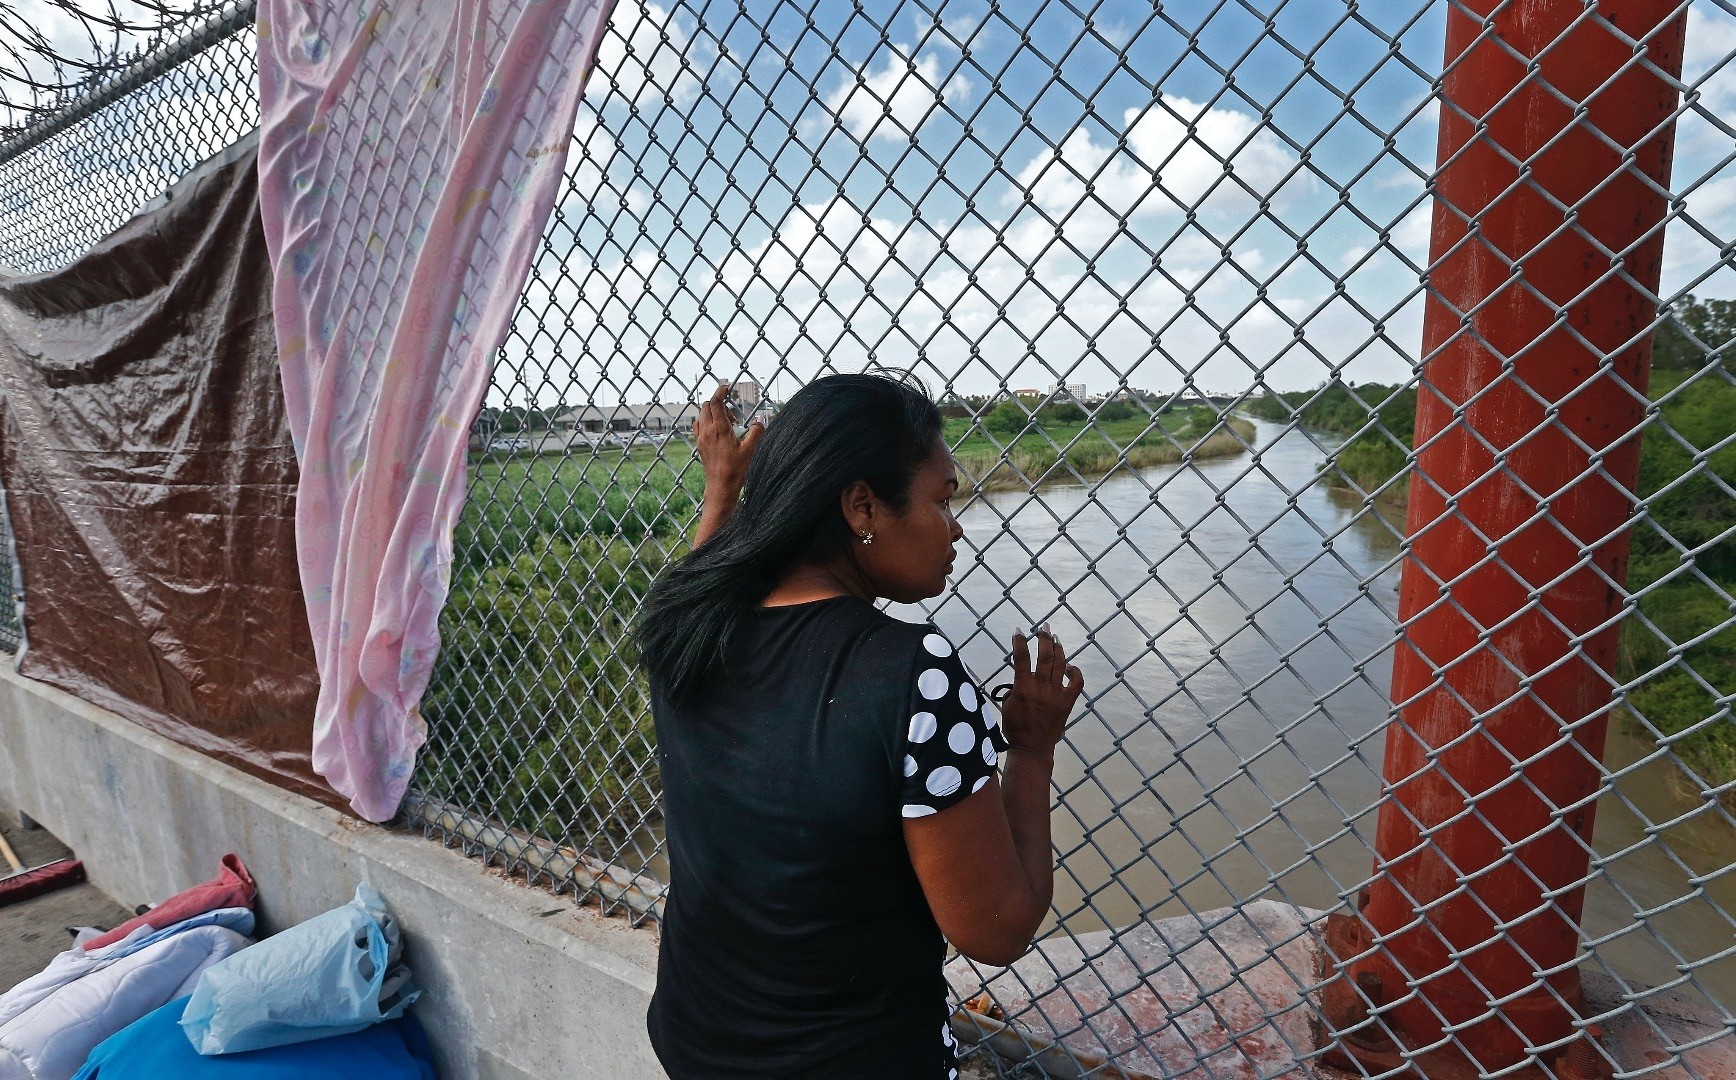 An immigrant seeking asylum looks out across the Rio Grande River while waiting in the middle of the bridge to get into the U.S. from Matamoros, Mexico.